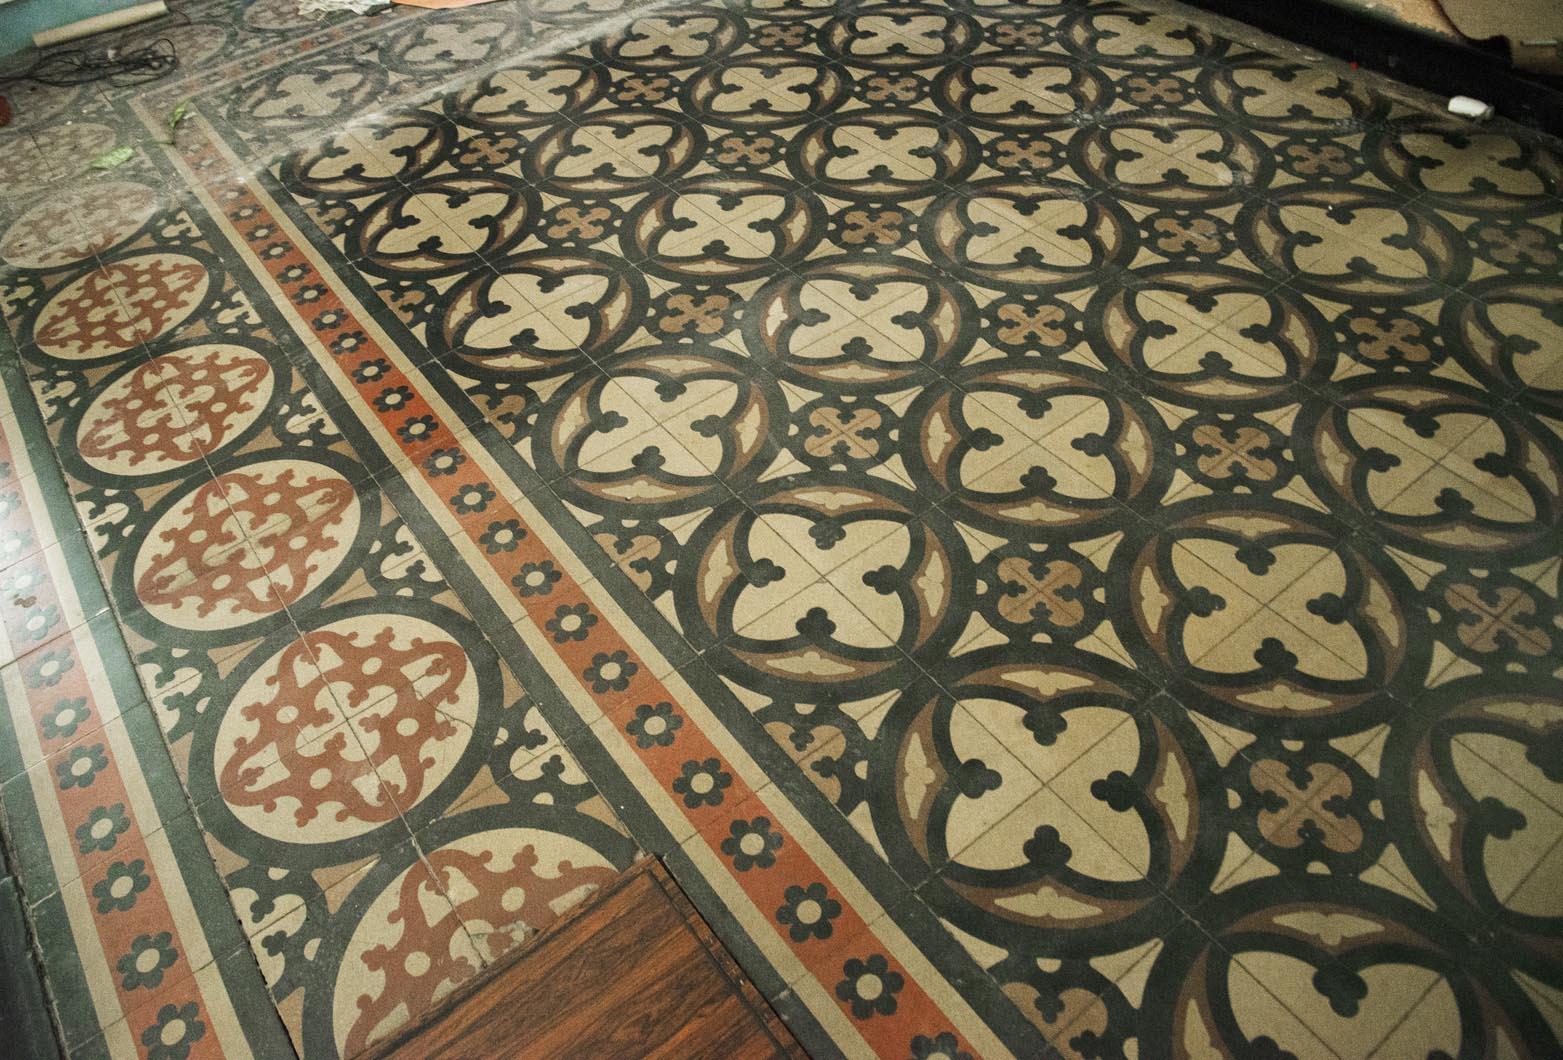 This authentic floor is composed of richly decorated cement tiles from a church. The dynamic composition dated from the 19th century is characterized by red, black and white patterns, forming an important ensemble that is both geometric and organic.